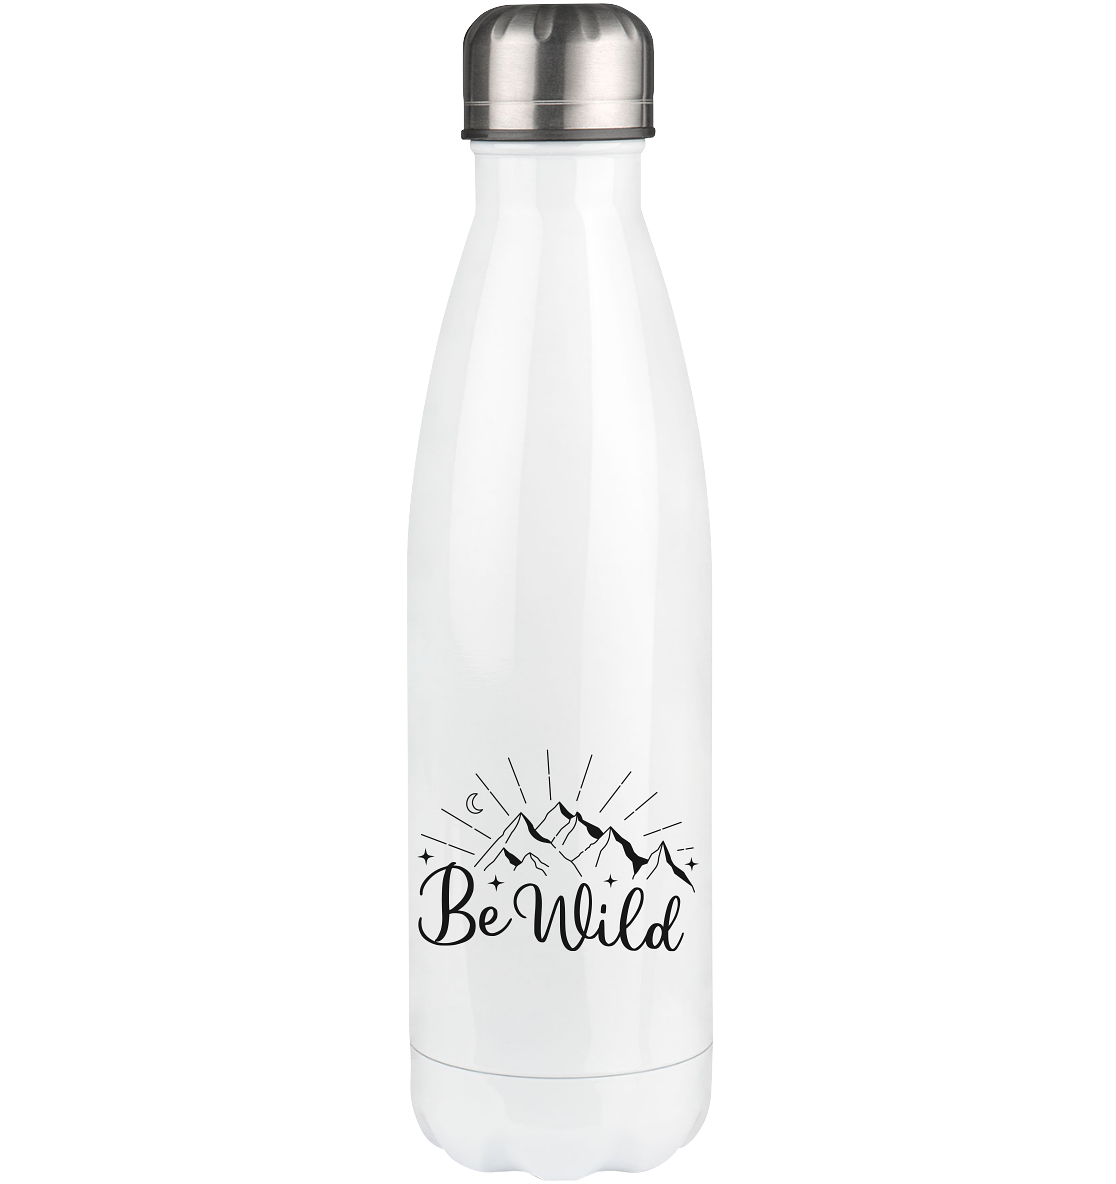 Be Wild - Edelstahl Thermosflasche camping wandern 500ml